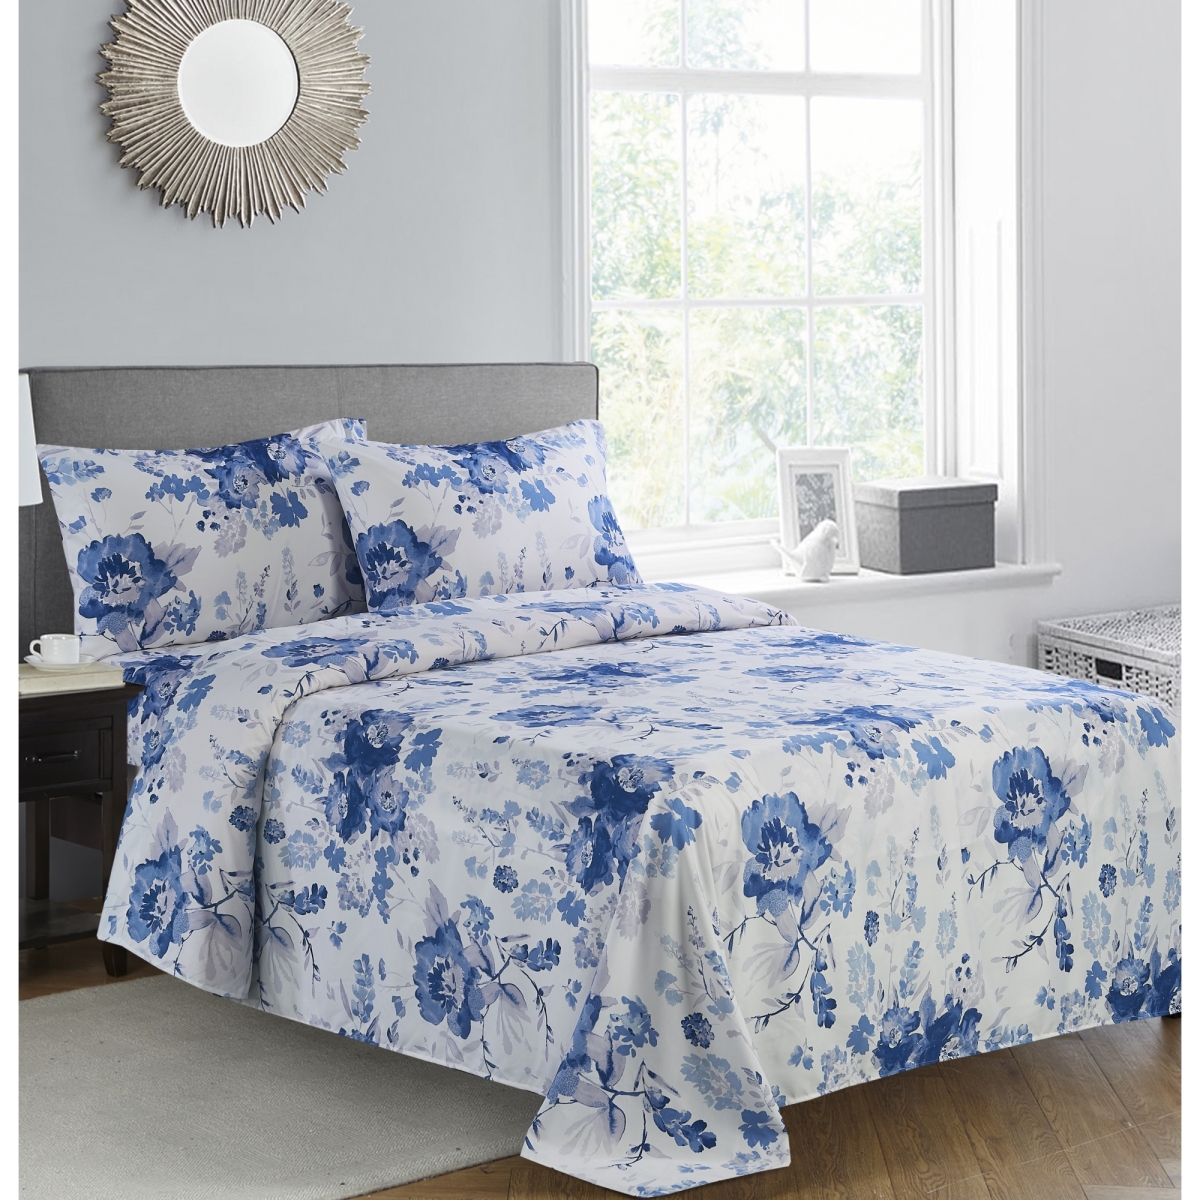 Whtx625-brk Microfiber Sheet Set With Printed Blue Rose, King Size - 4 Piece